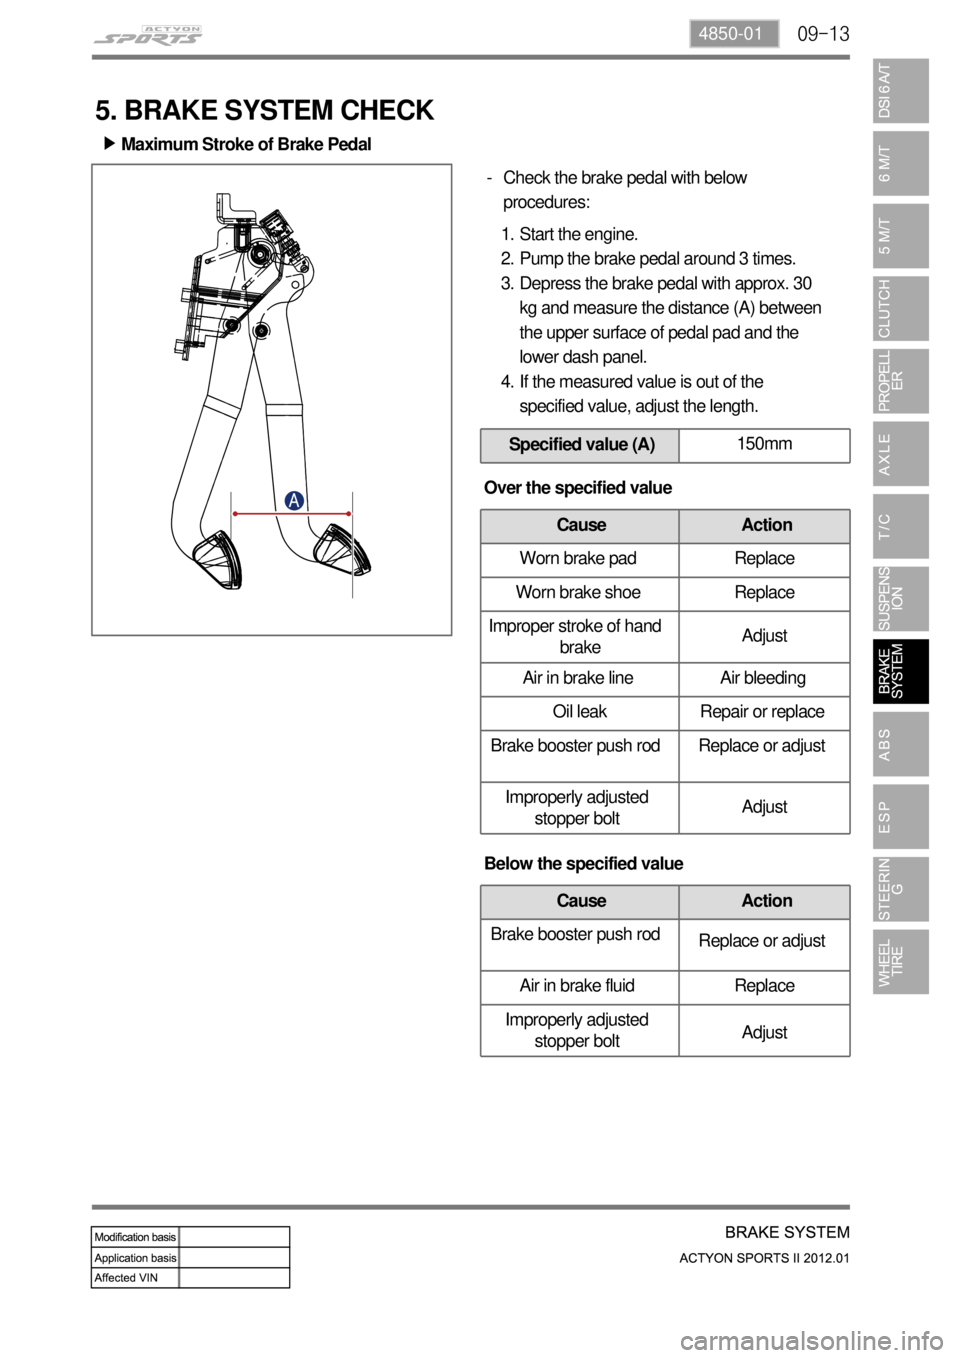 SSANGYONG NEW ACTYON SPORTS 2012  Service Manual 09-134850-01
Maximum Stroke of Brake Pedal ▶
Check the brake pedal with below 
procedures: -
Start the engine.
Pump the brake pedal around 3 times.
Depress the brake pedal with approx. 30 
kg and me